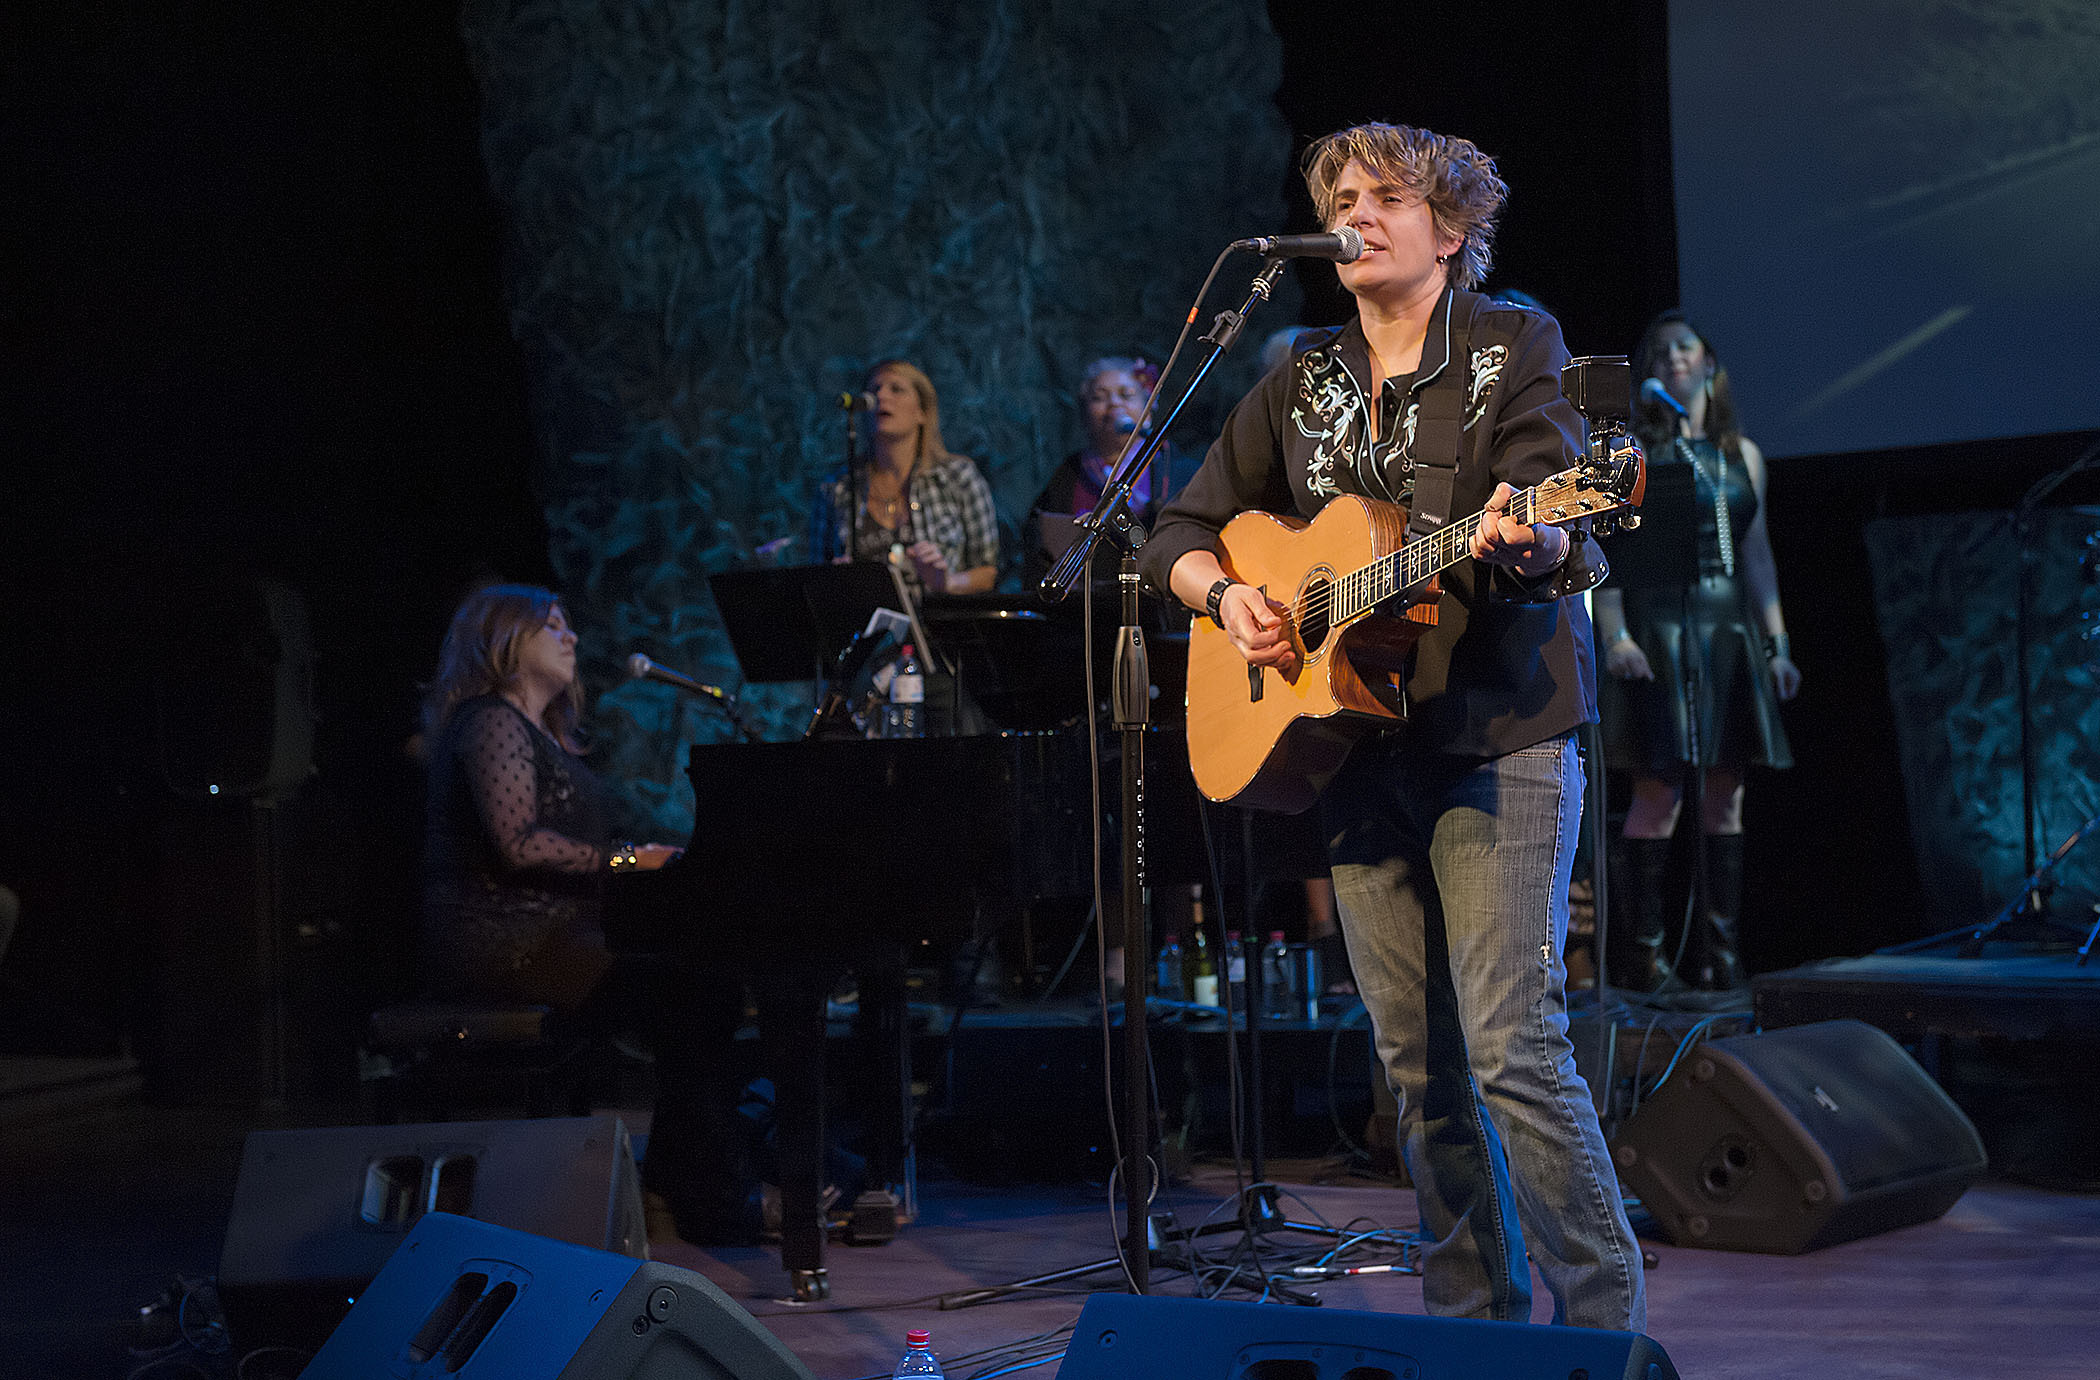 Inda Eaton and Friends performing at Bay Street Theater in Sag Harbor in 2016.
MICHAEL HELLER